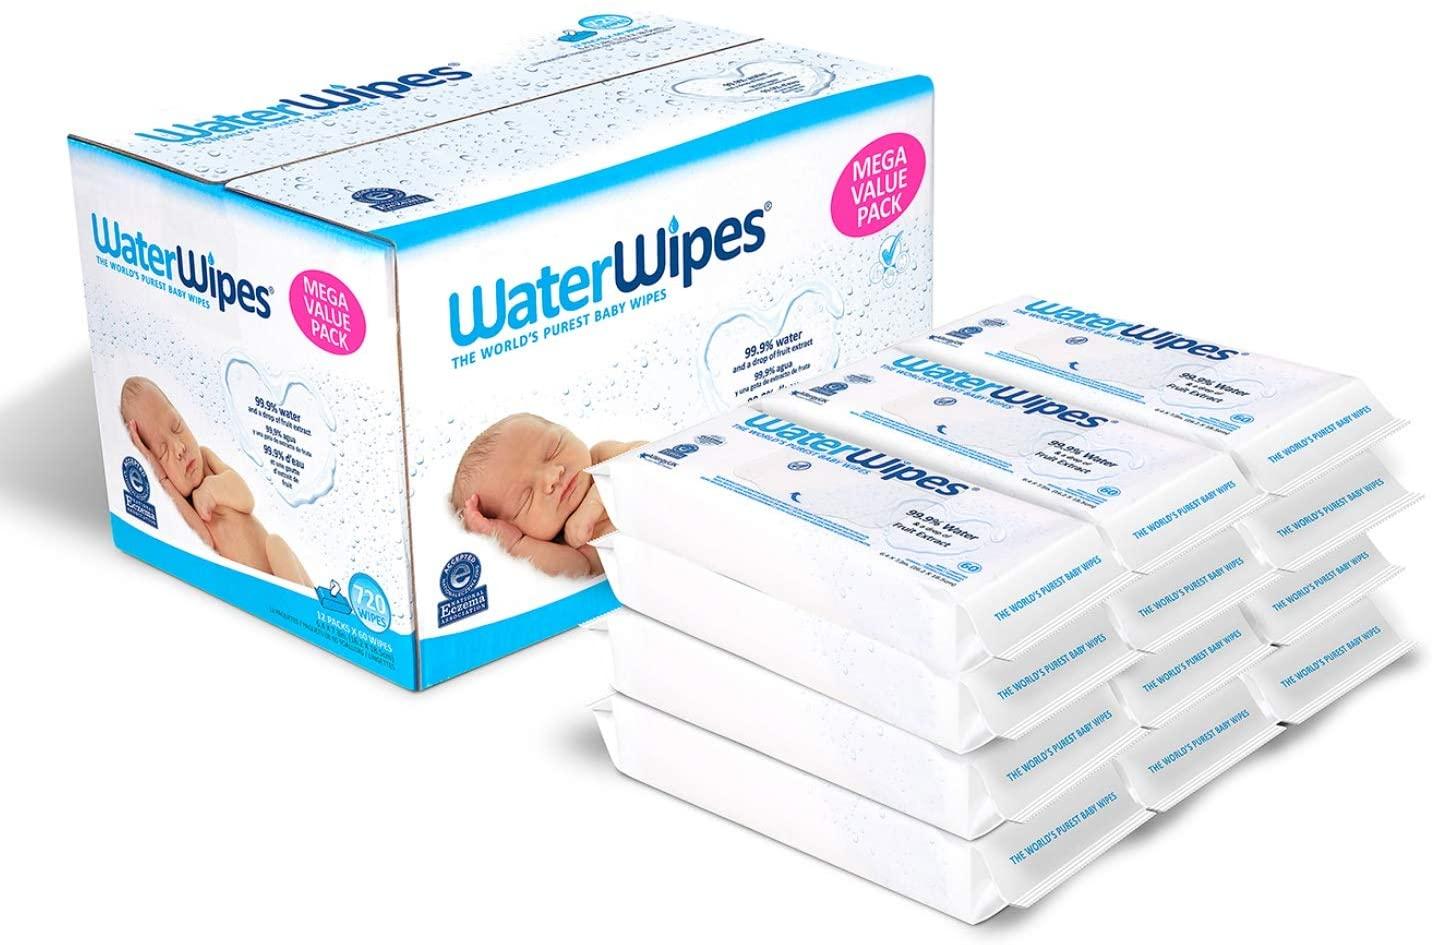 720 WaterWipes Original Baby Wipes for $32.67 Shipped